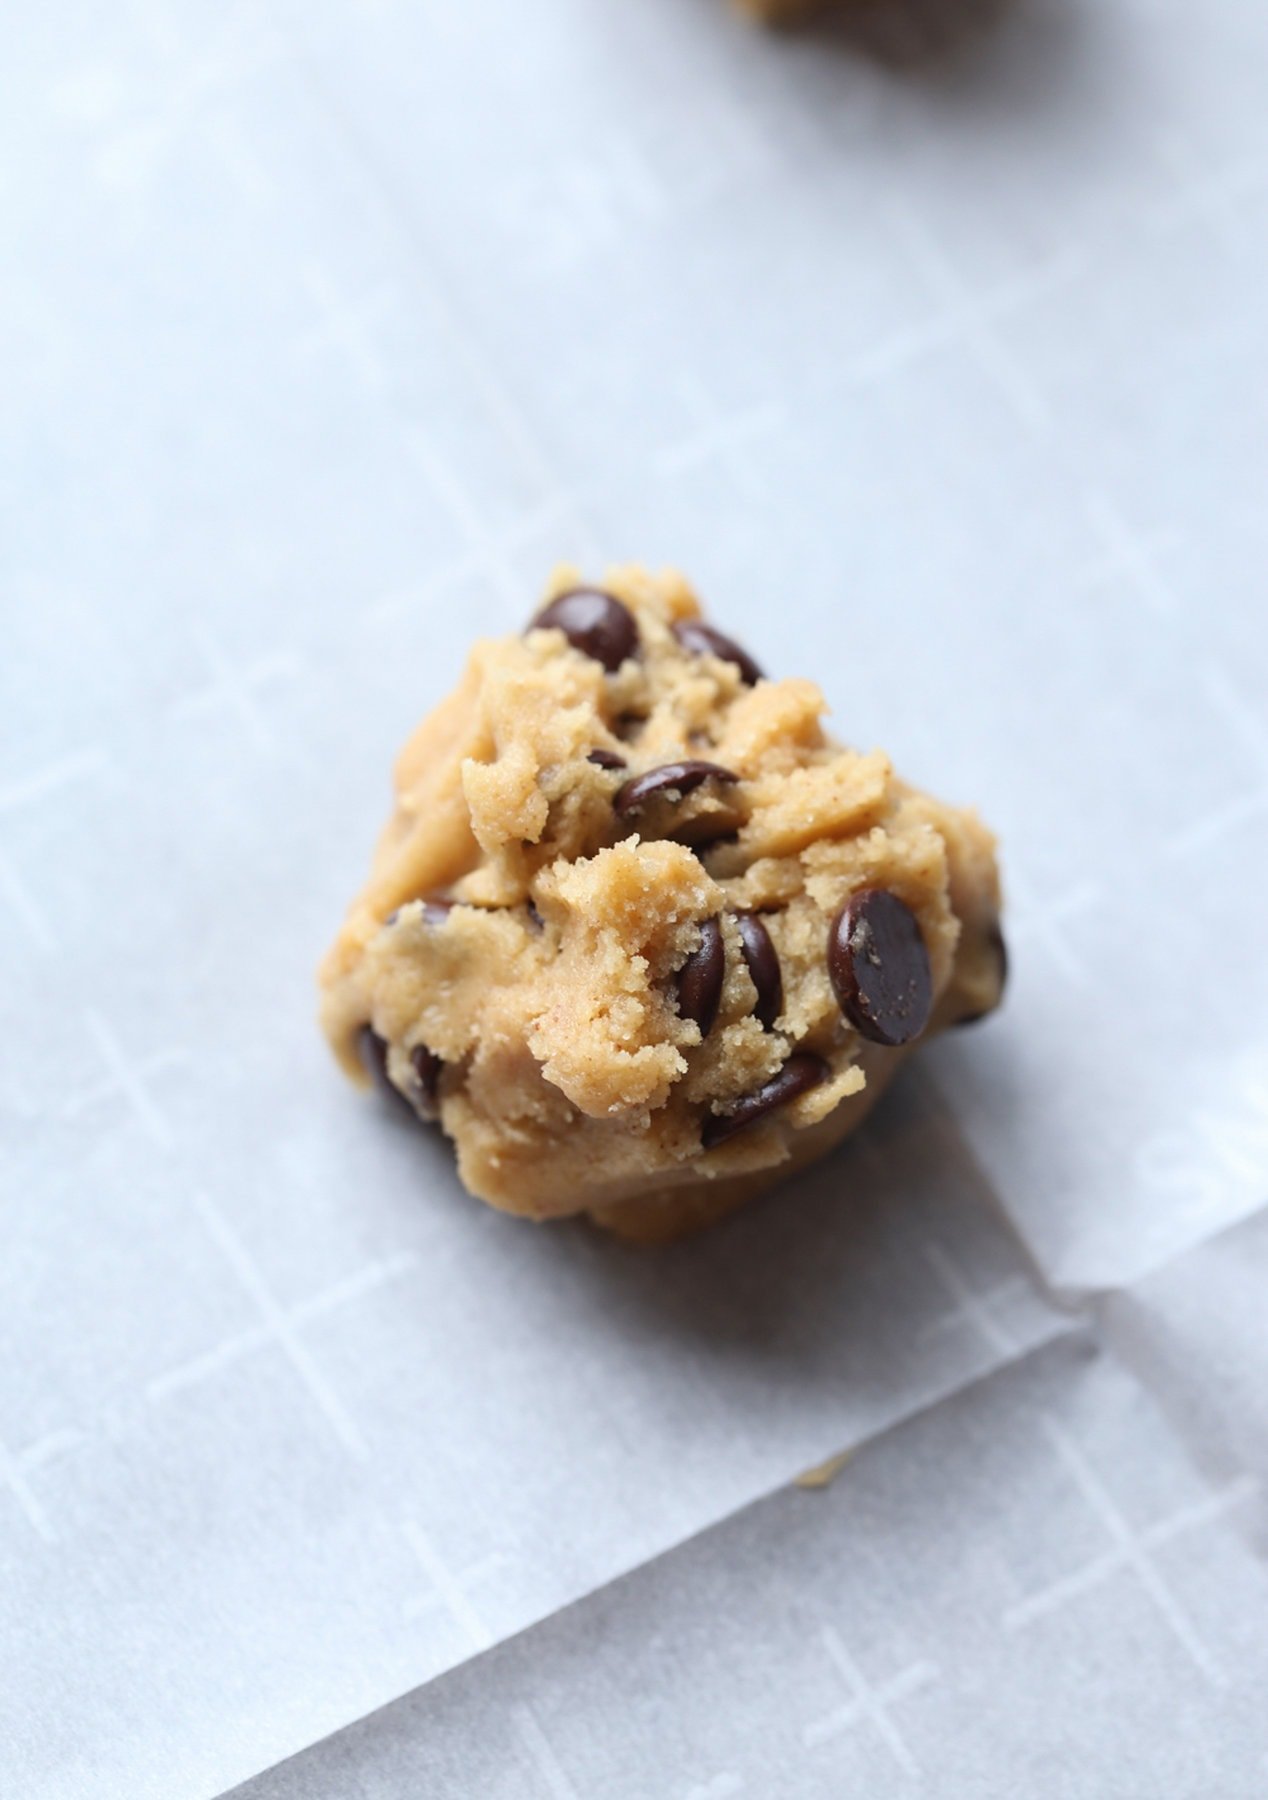 A ball of cookie dough on a parchment lined baking sheet